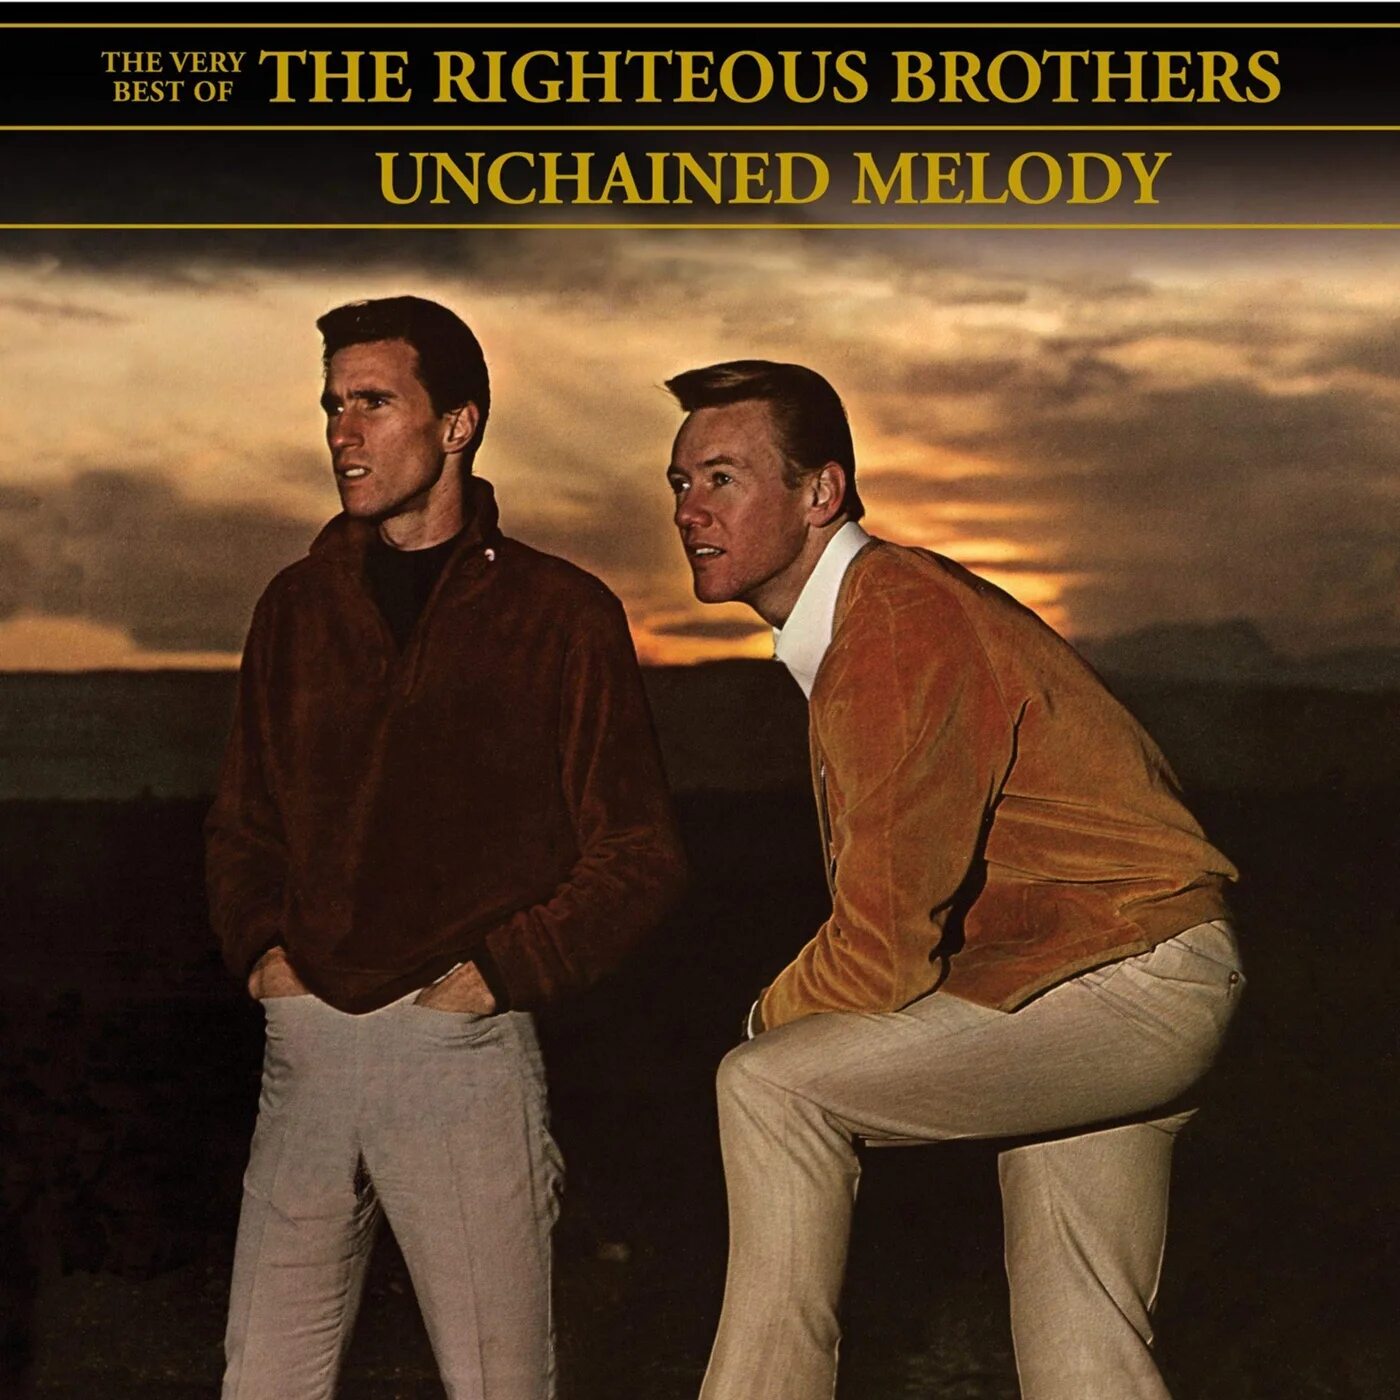 The righteous brothers unchained melody. The Righteous brothers. The Righteous brothers ― Unchained Melody обложка. Группа the Righteous brothers. The Righteous brothers Unchained.